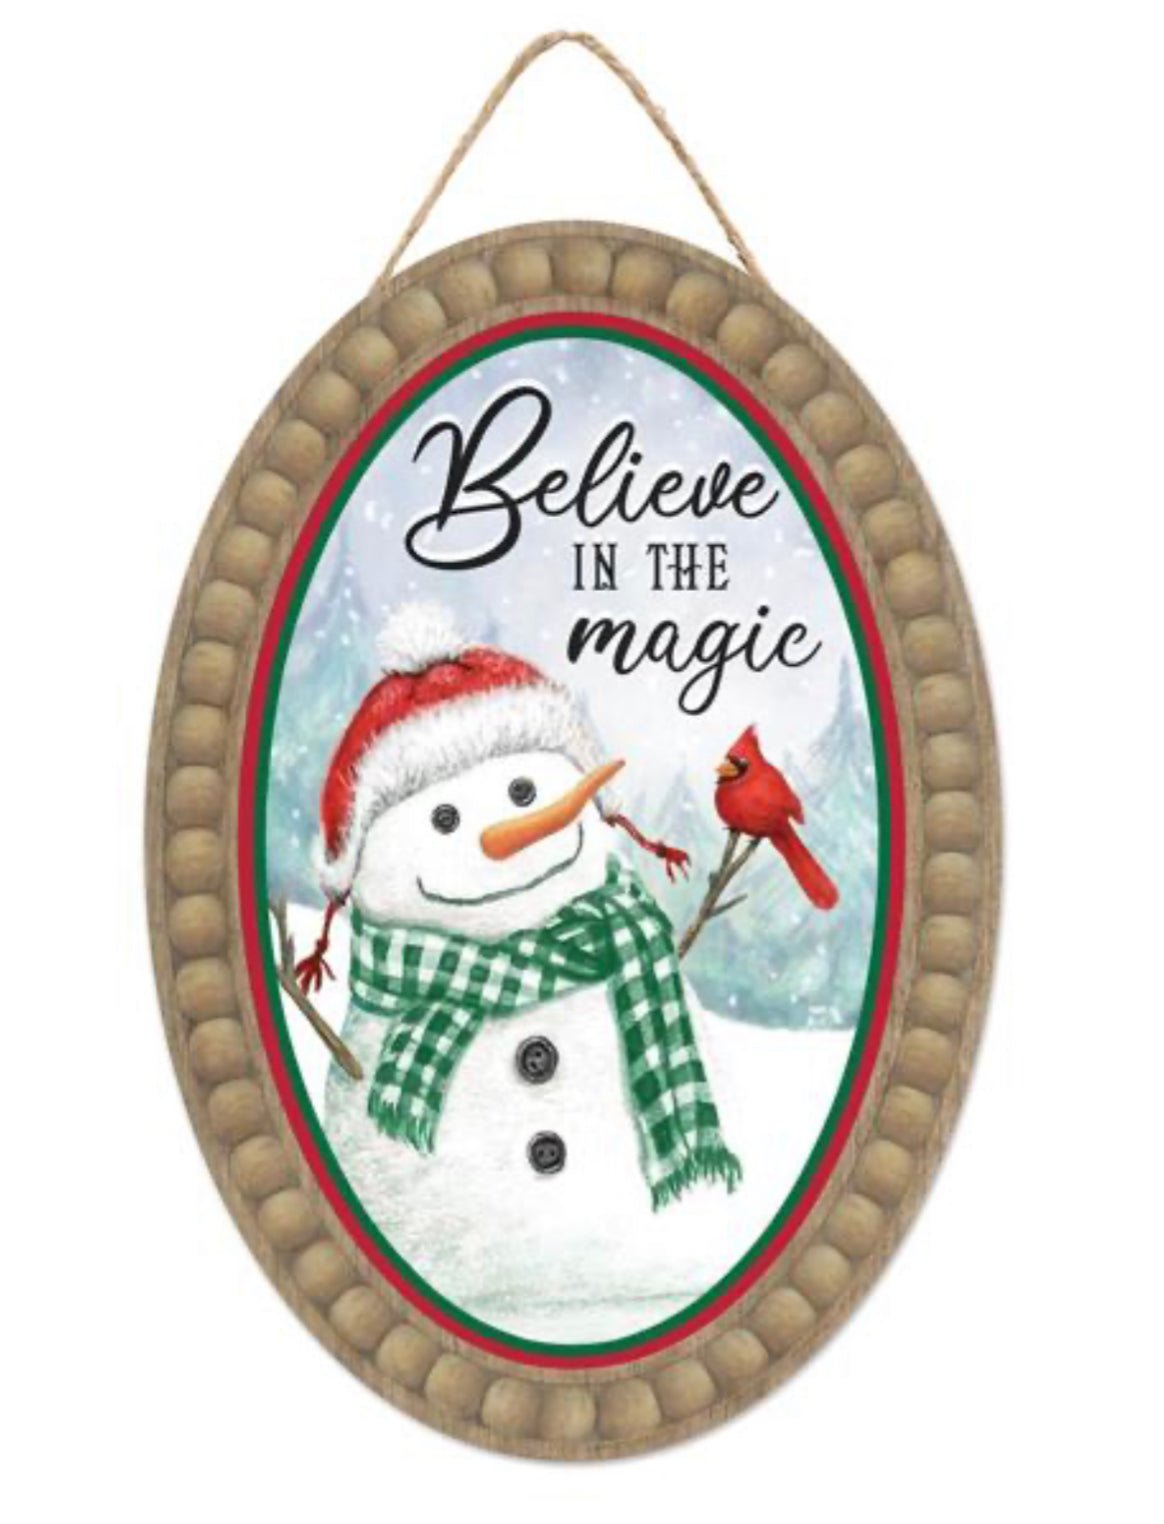 Believe in the magic snowman and cardinal sign - Greenery Marketsigns for wreathsAP7302